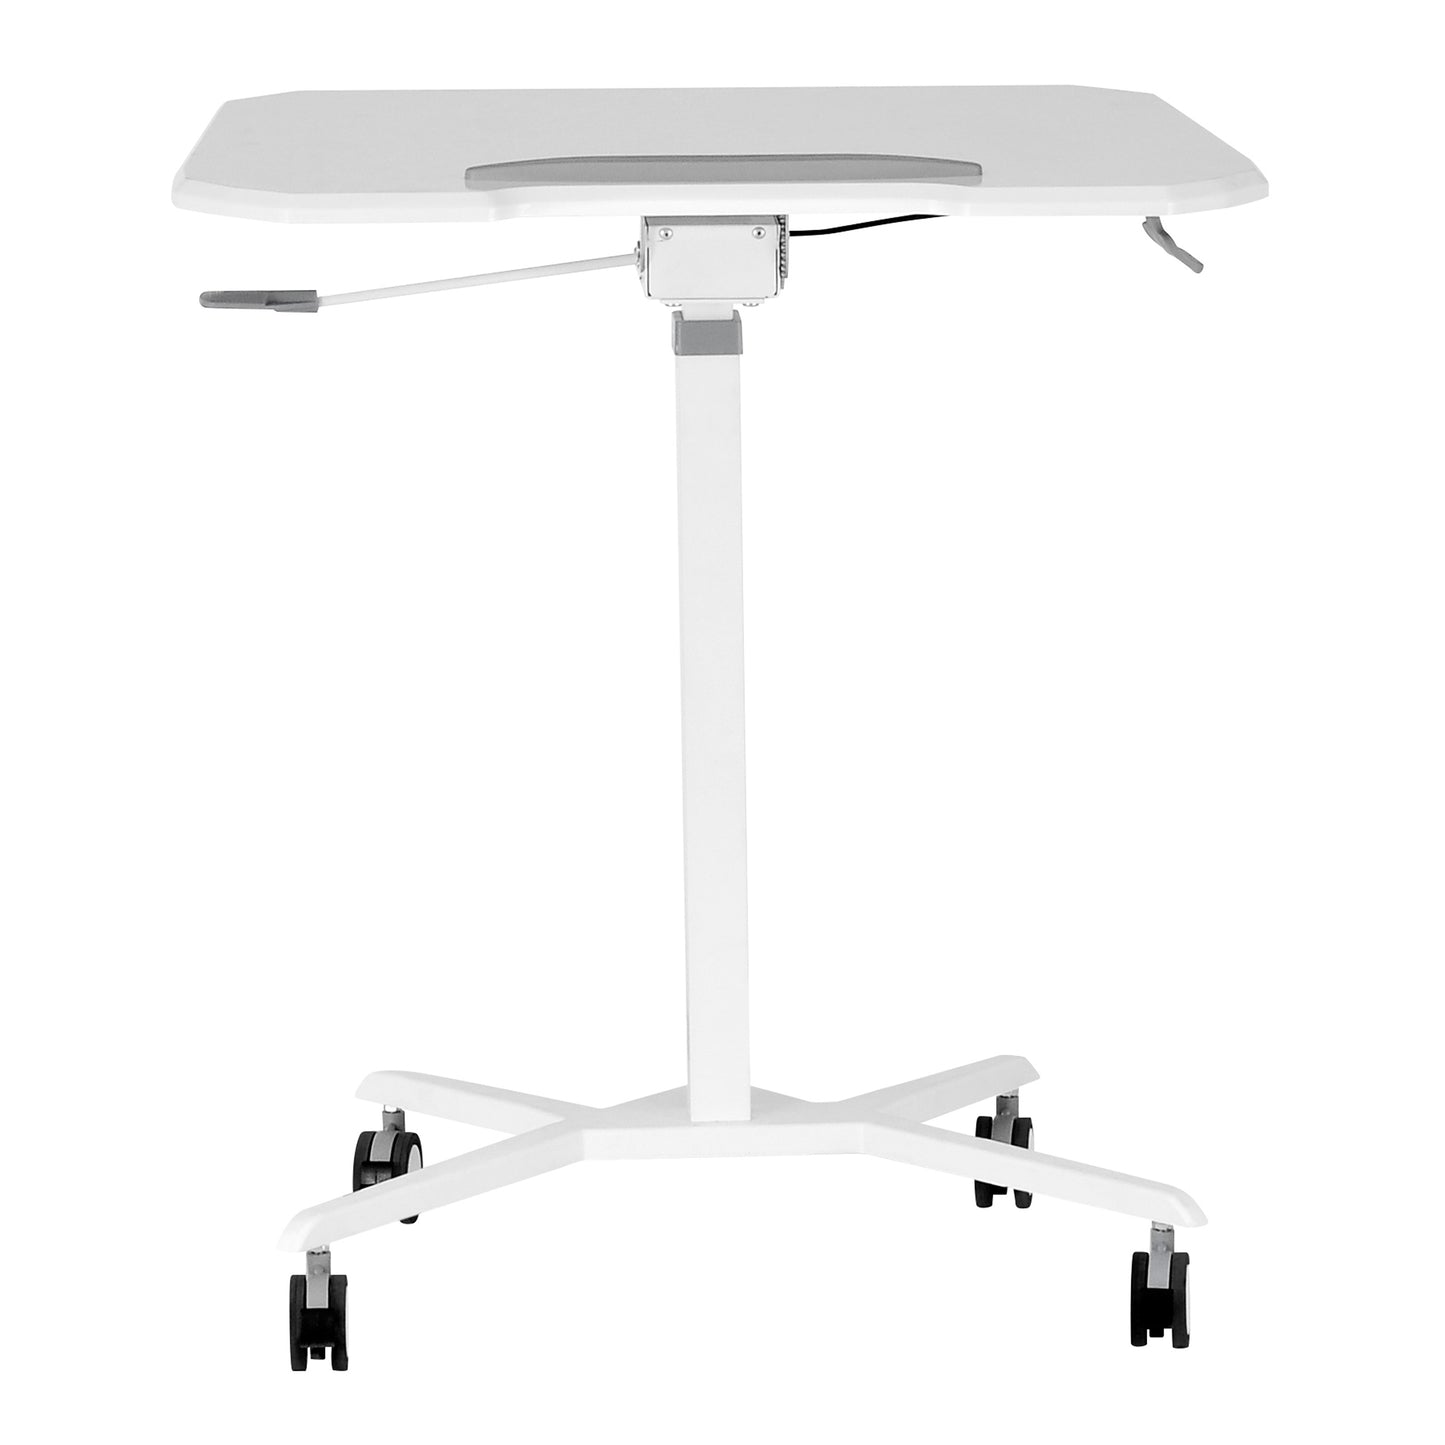 White Sit to Stand Mobile Laptop Computer Stand with Height Adjustable and Tiltable Tabletop